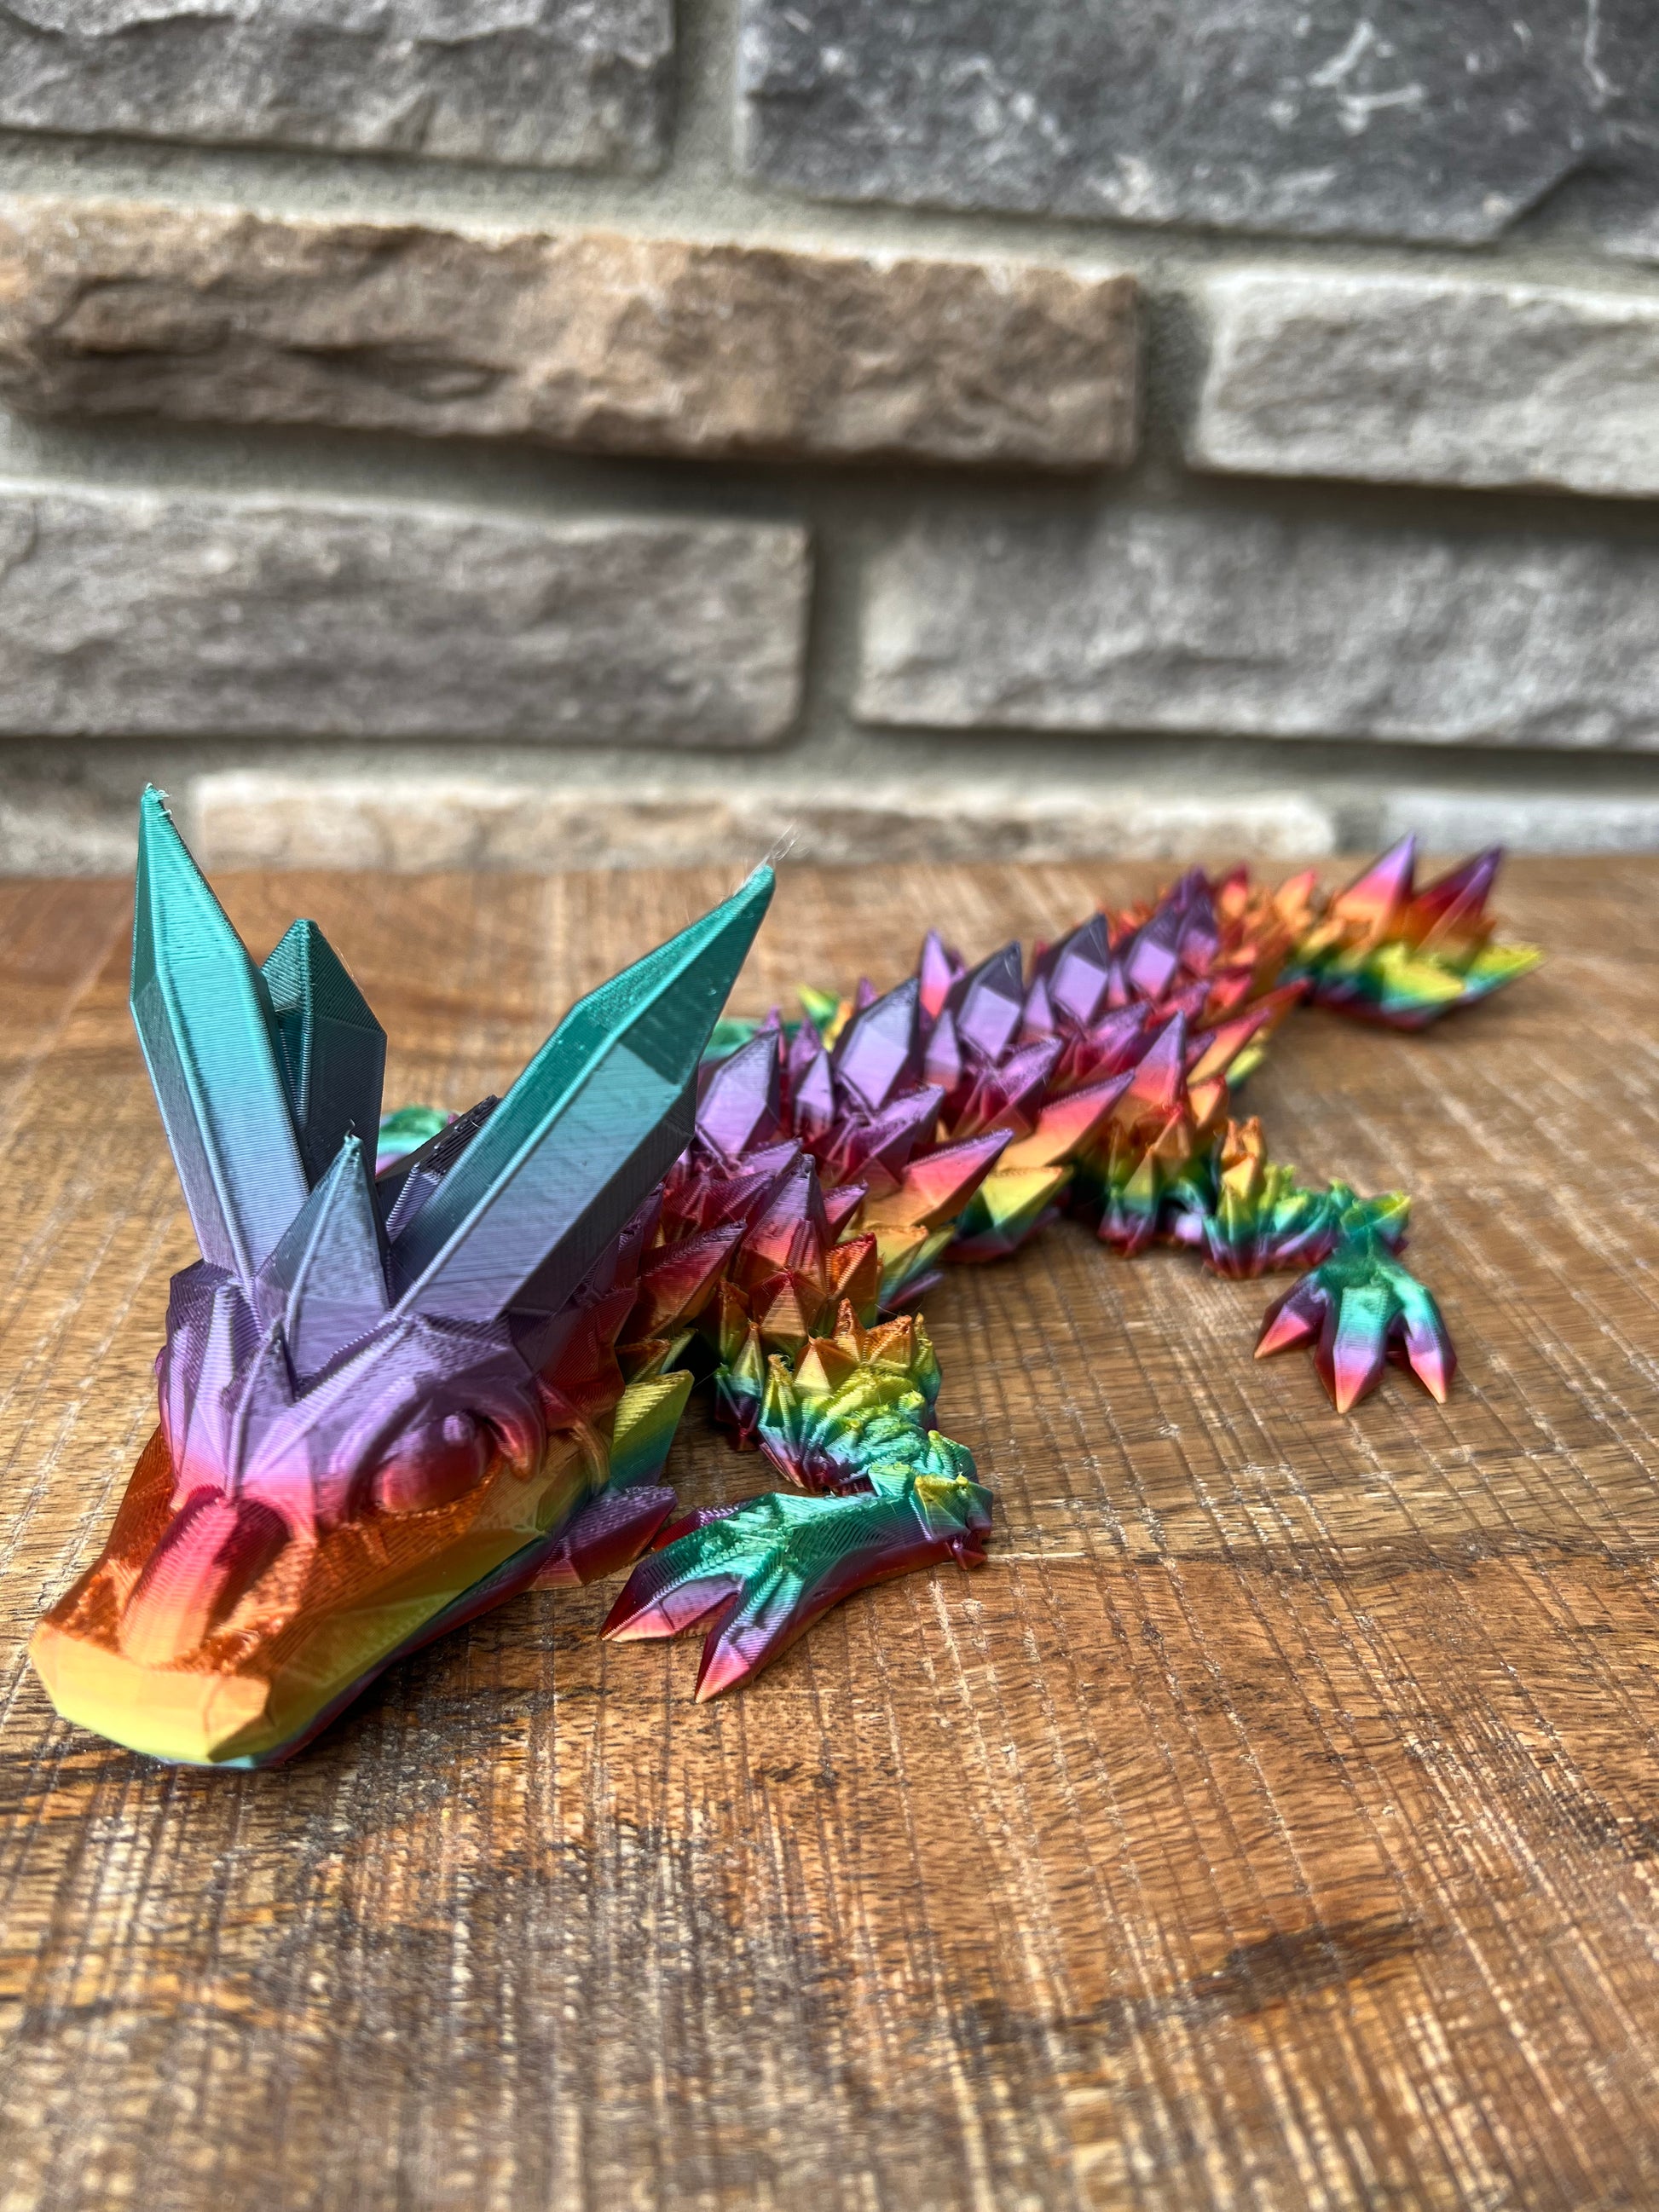 3D Printed Dragon - Customizable, Made to Order Articulated Fidget Mythical  Dragon Toy, Gift (M, Rainbow)